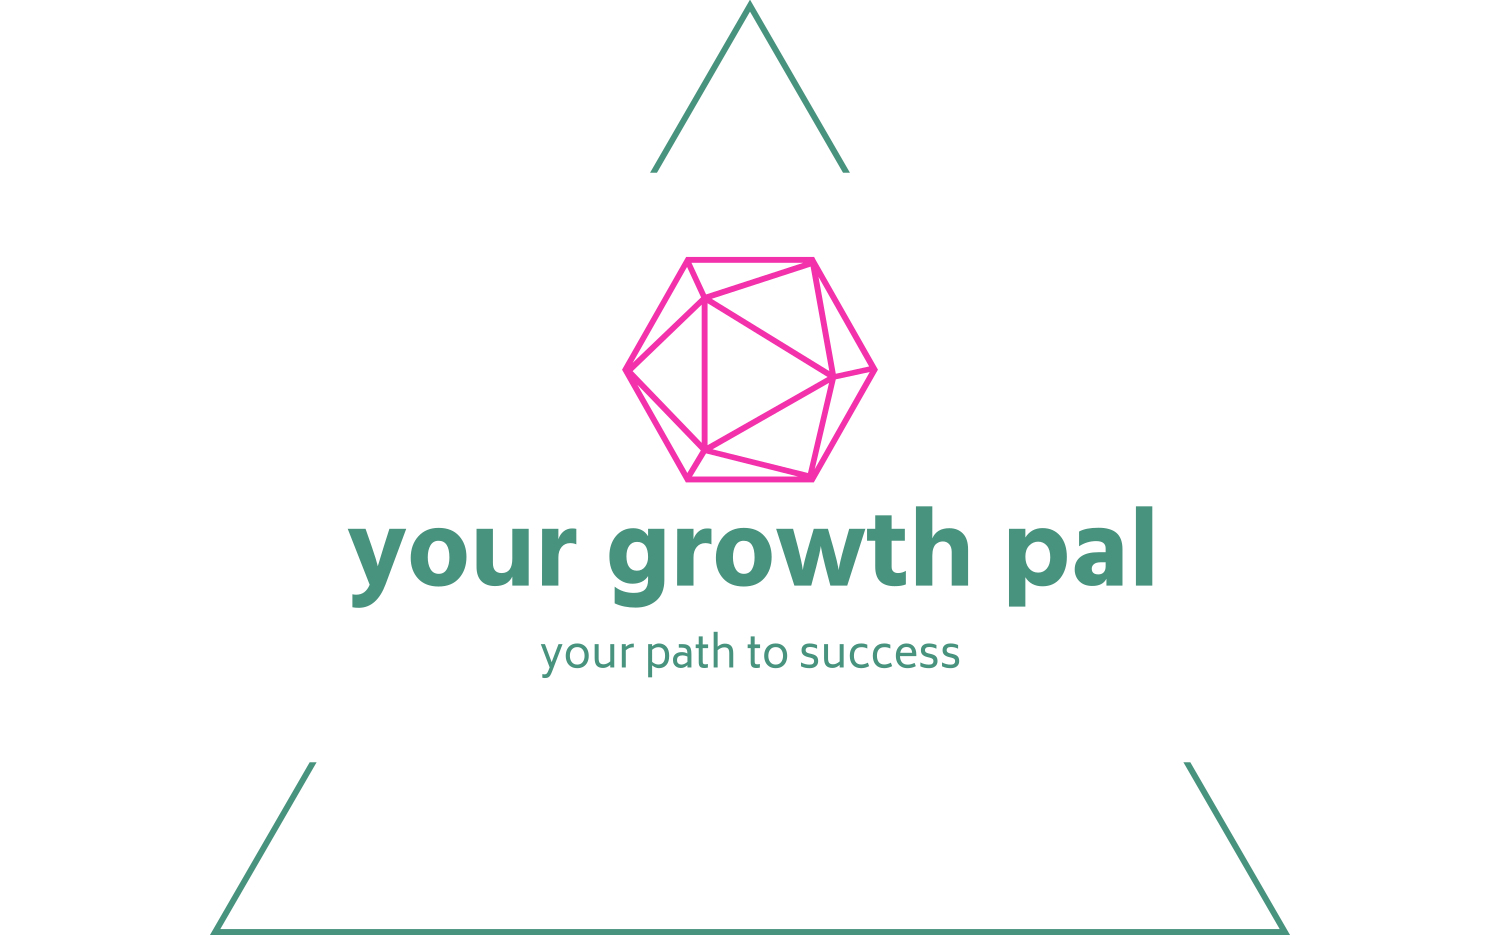 Your growth pal